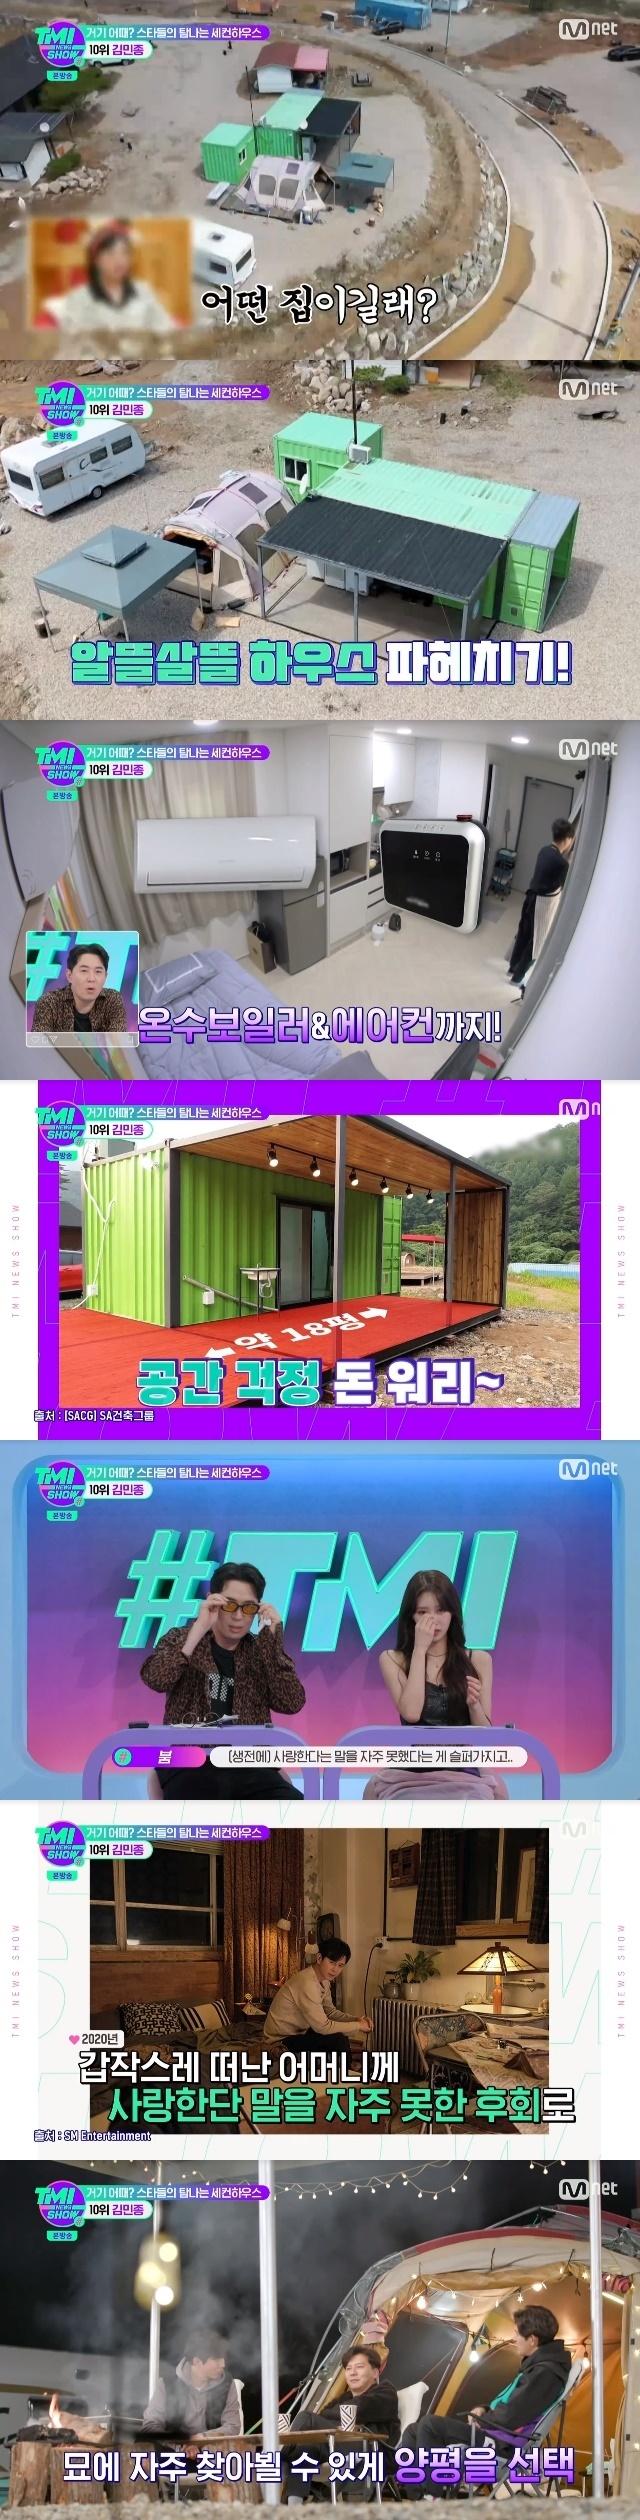 Kim Min-jongs Yangpyeong station container house was introduced.In the 27th Mnet entertainment TMI NEWS SHOW broadcast on August 31, I looked at The coveted Second House BEST 10 of the stars.10th place was Kim Min-jong, the original song of I feel only you and With you and current SM Entertainment representative.Since the 1990s, he has been loved by fans and has been working with Son Ji-chang and The Blue.